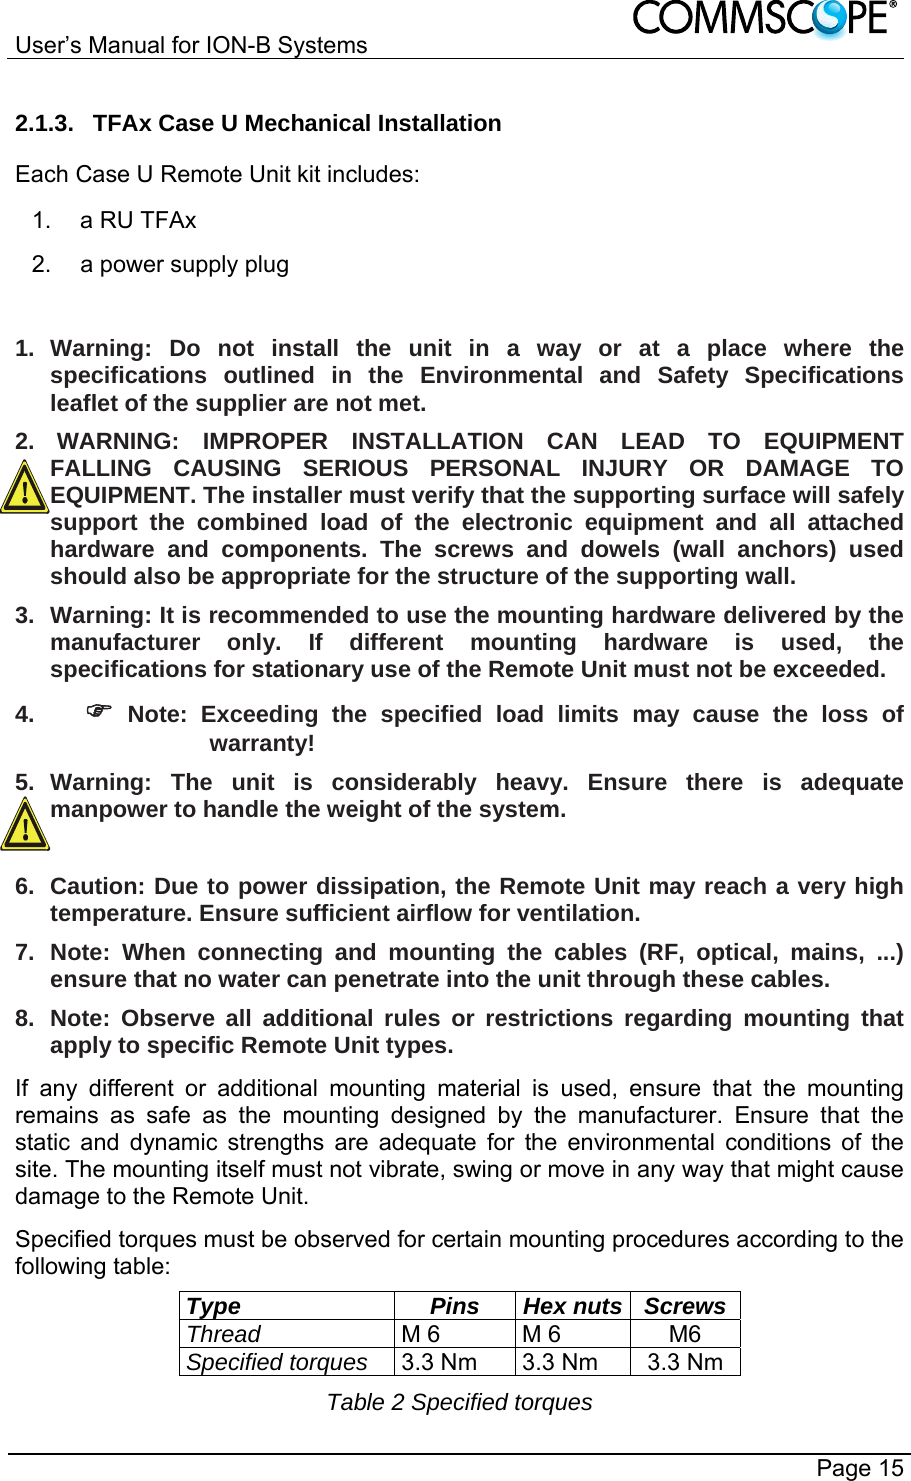 User’s Manual for ION-B Systems       Page 15 2.1.3.  TFAx Case U Mechanical Installation Each Case U Remote Unit kit includes: 1. a RU TFAx 2.  a power supply plug  1. Warning: Do not install the unit in a way or at a place where the specifications outlined in the Environmental and Safety Specifications leaflet of the supplier are not met. 2.   WARNING: IMPROPER INSTALLATION CAN LEAD TO EQUIPMENT FALLING CAUSING SERIOUS PERSONAL INJURY OR DAMAGE TO EQUIPMENT. The installer must verify that the supporting surface will safely support the combined load of the electronic equipment and all attached hardware and components. The screws and dowels (wall anchors) used should also be appropriate for the structure of the supporting wall. 3.  Warning: It is recommended to use the mounting hardware delivered by the manufacturer only. If different mounting hardware is used, the specifications for stationary use of the Remote Unit must not be exceeded. 4.   Note: Exceeding the specified load limits may cause the loss of warranty! 5. Warning: The unit is considerably heavy. Ensure there is adequate manpower to handle the weight of the system.  6.  Caution: Due to power dissipation, the Remote Unit may reach a very high temperature. Ensure sufficient airflow for ventilation. 7. Note: When connecting and mounting the cables (RF, optical, mains, ...) ensure that no water can penetrate into the unit through these cables. 8.  Note: Observe all additional rules or restrictions regarding mounting that apply to specific Remote Unit types. If any different or additional mounting material is used, ensure that the mounting remains as safe as the mounting designed by the manufacturer. Ensure that the static and dynamic strengths are adequate for the environmental conditions of the site. The mounting itself must not vibrate, swing or move in any way that might cause damage to the Remote Unit. Specified torques must be observed for certain mounting procedures according to the following table: Type Pins Hex nuts Screws Thread M 6  M 6  M6 Specified torques 3.3 Nm  3.3 Nm  3.3 Nm Table 2 Specified torques 